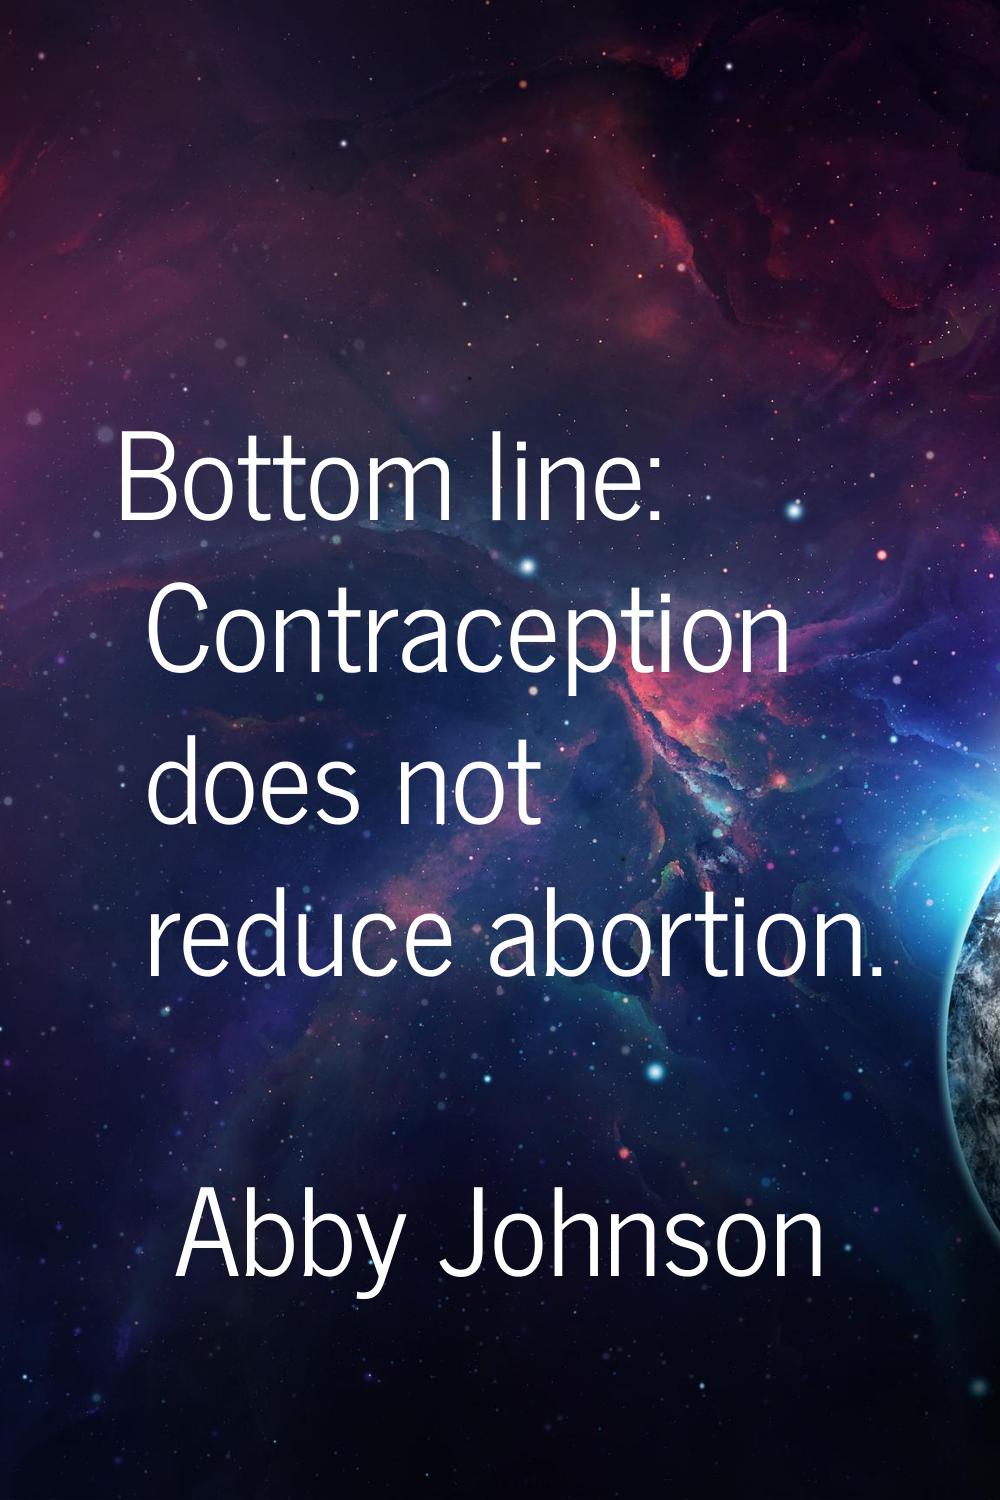 Bottom line: Contraception does not reduce abortion.